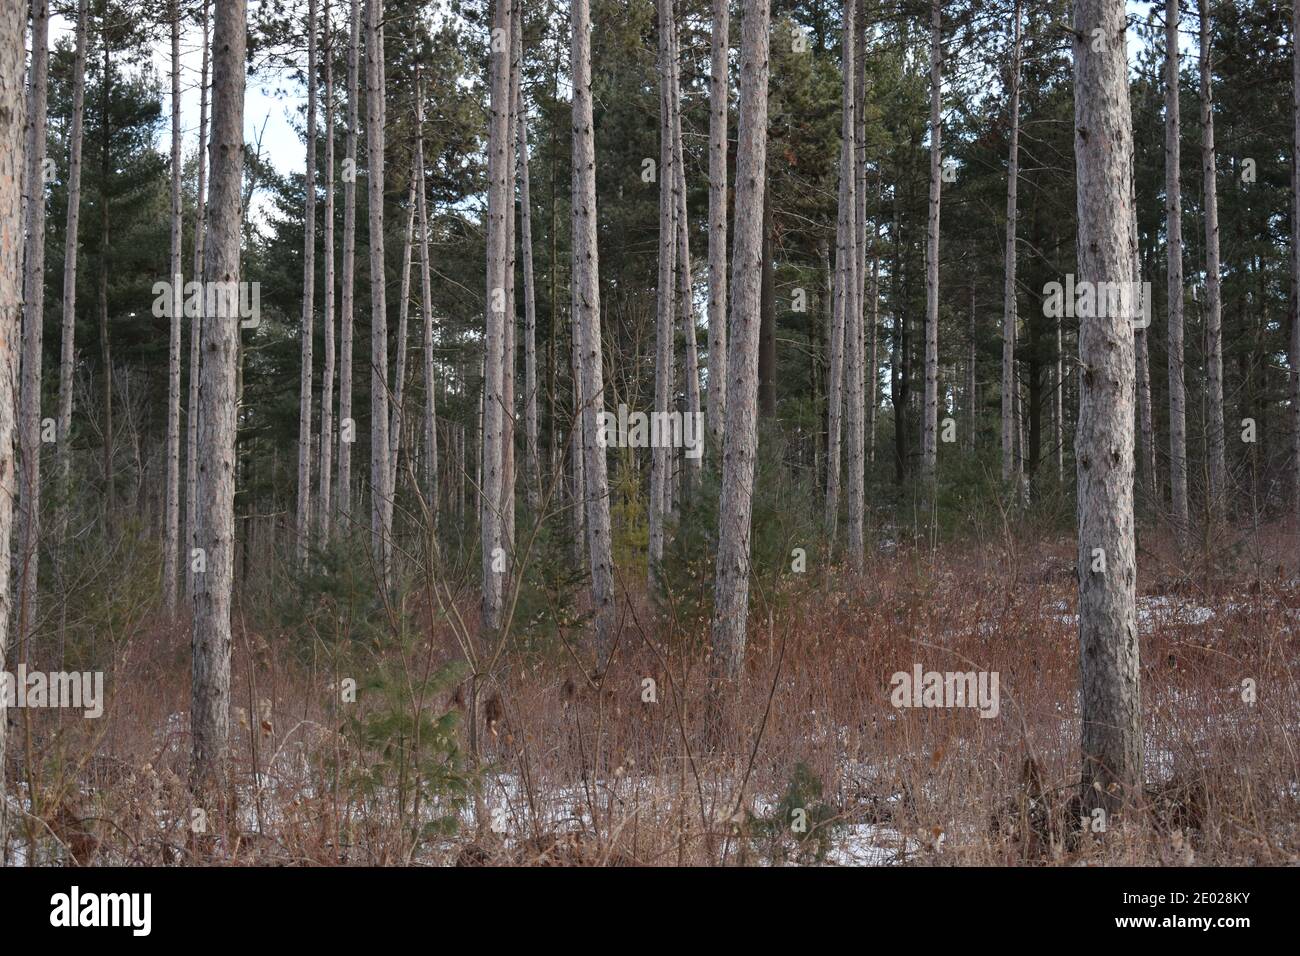 Walking through a forest full of birch trees Stock Photo